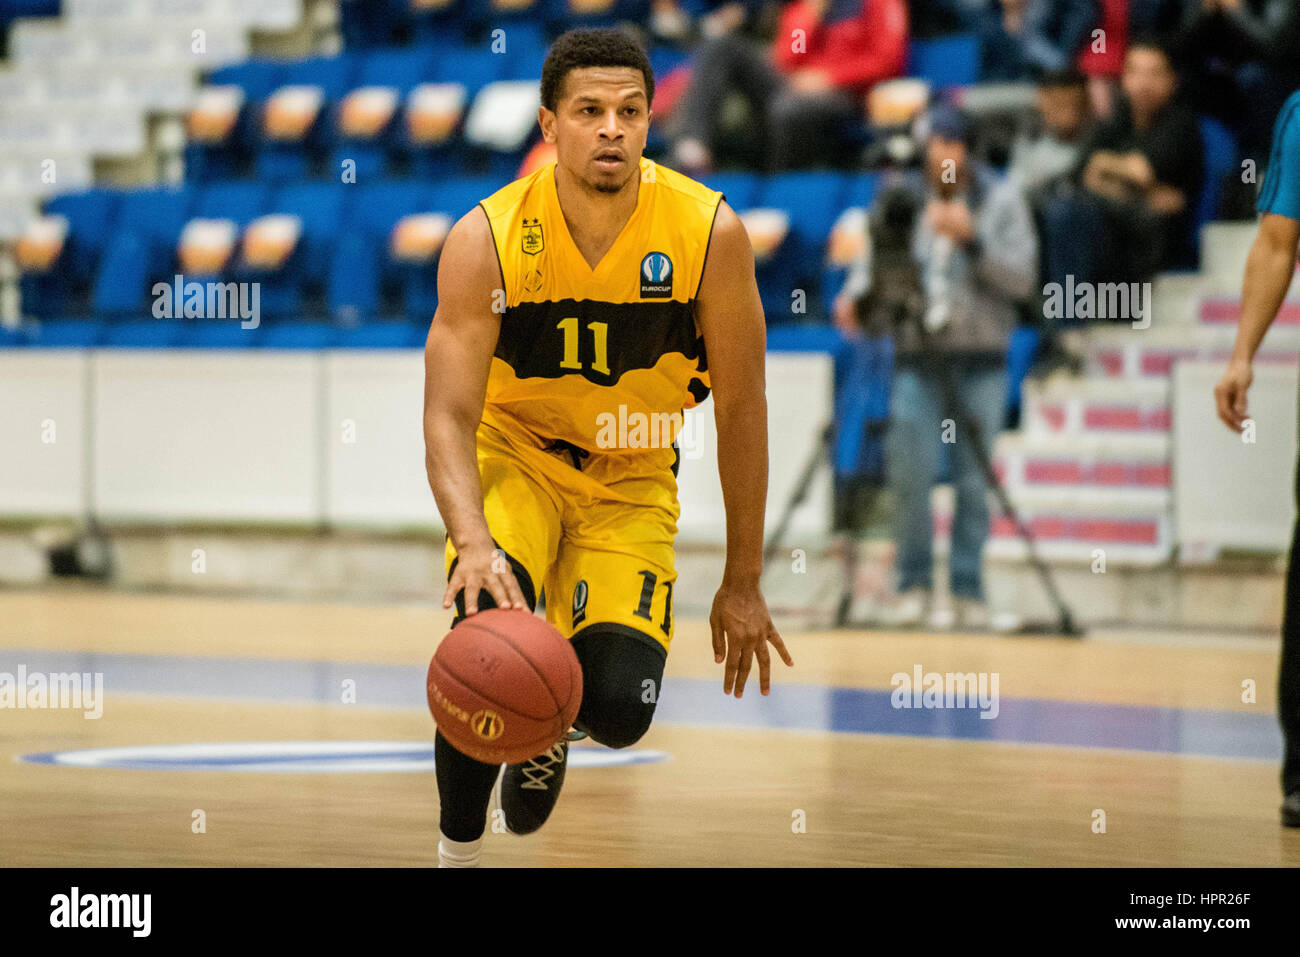 December 9, 2015: Dominic Waters #11 of Aris Thessaloniki during the  Eurocup Basketball game between Steaua CSM EximBank Bucharest (ROU) vs Aris  Thessaloniki (GRE) at Polyvalent Hall in Bucharest, Romania ROU. Photo: